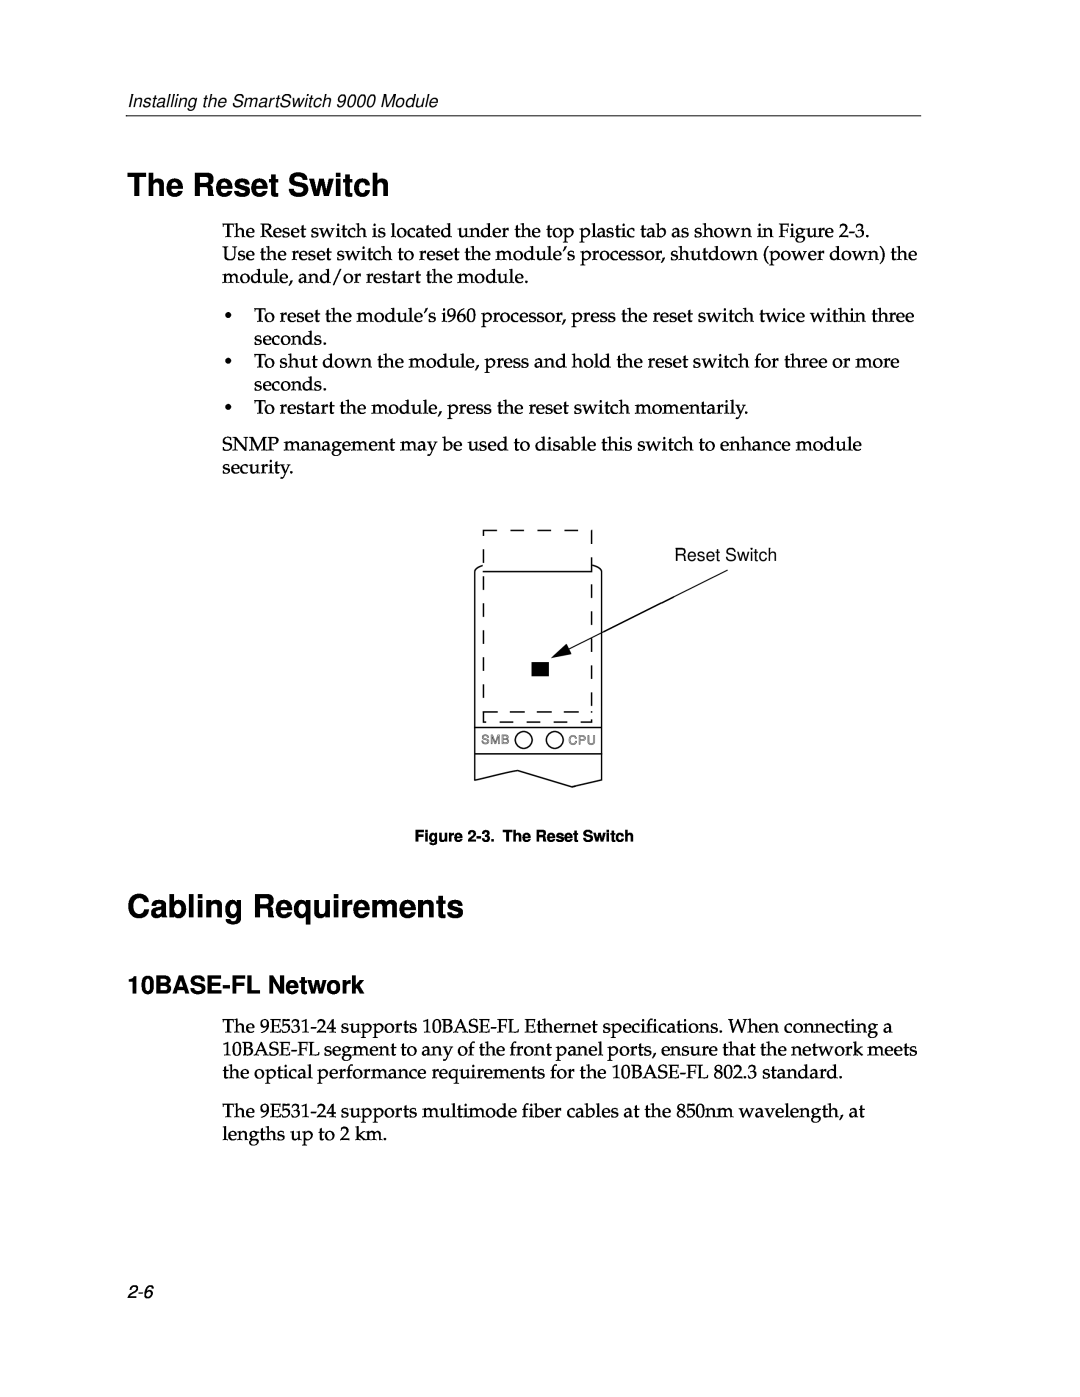 Cabletron Systems 9F125-0, 9F120-08, 9F122-12 manual The Reset Switch, Cabling Requirements, 10BASE-FL Network 